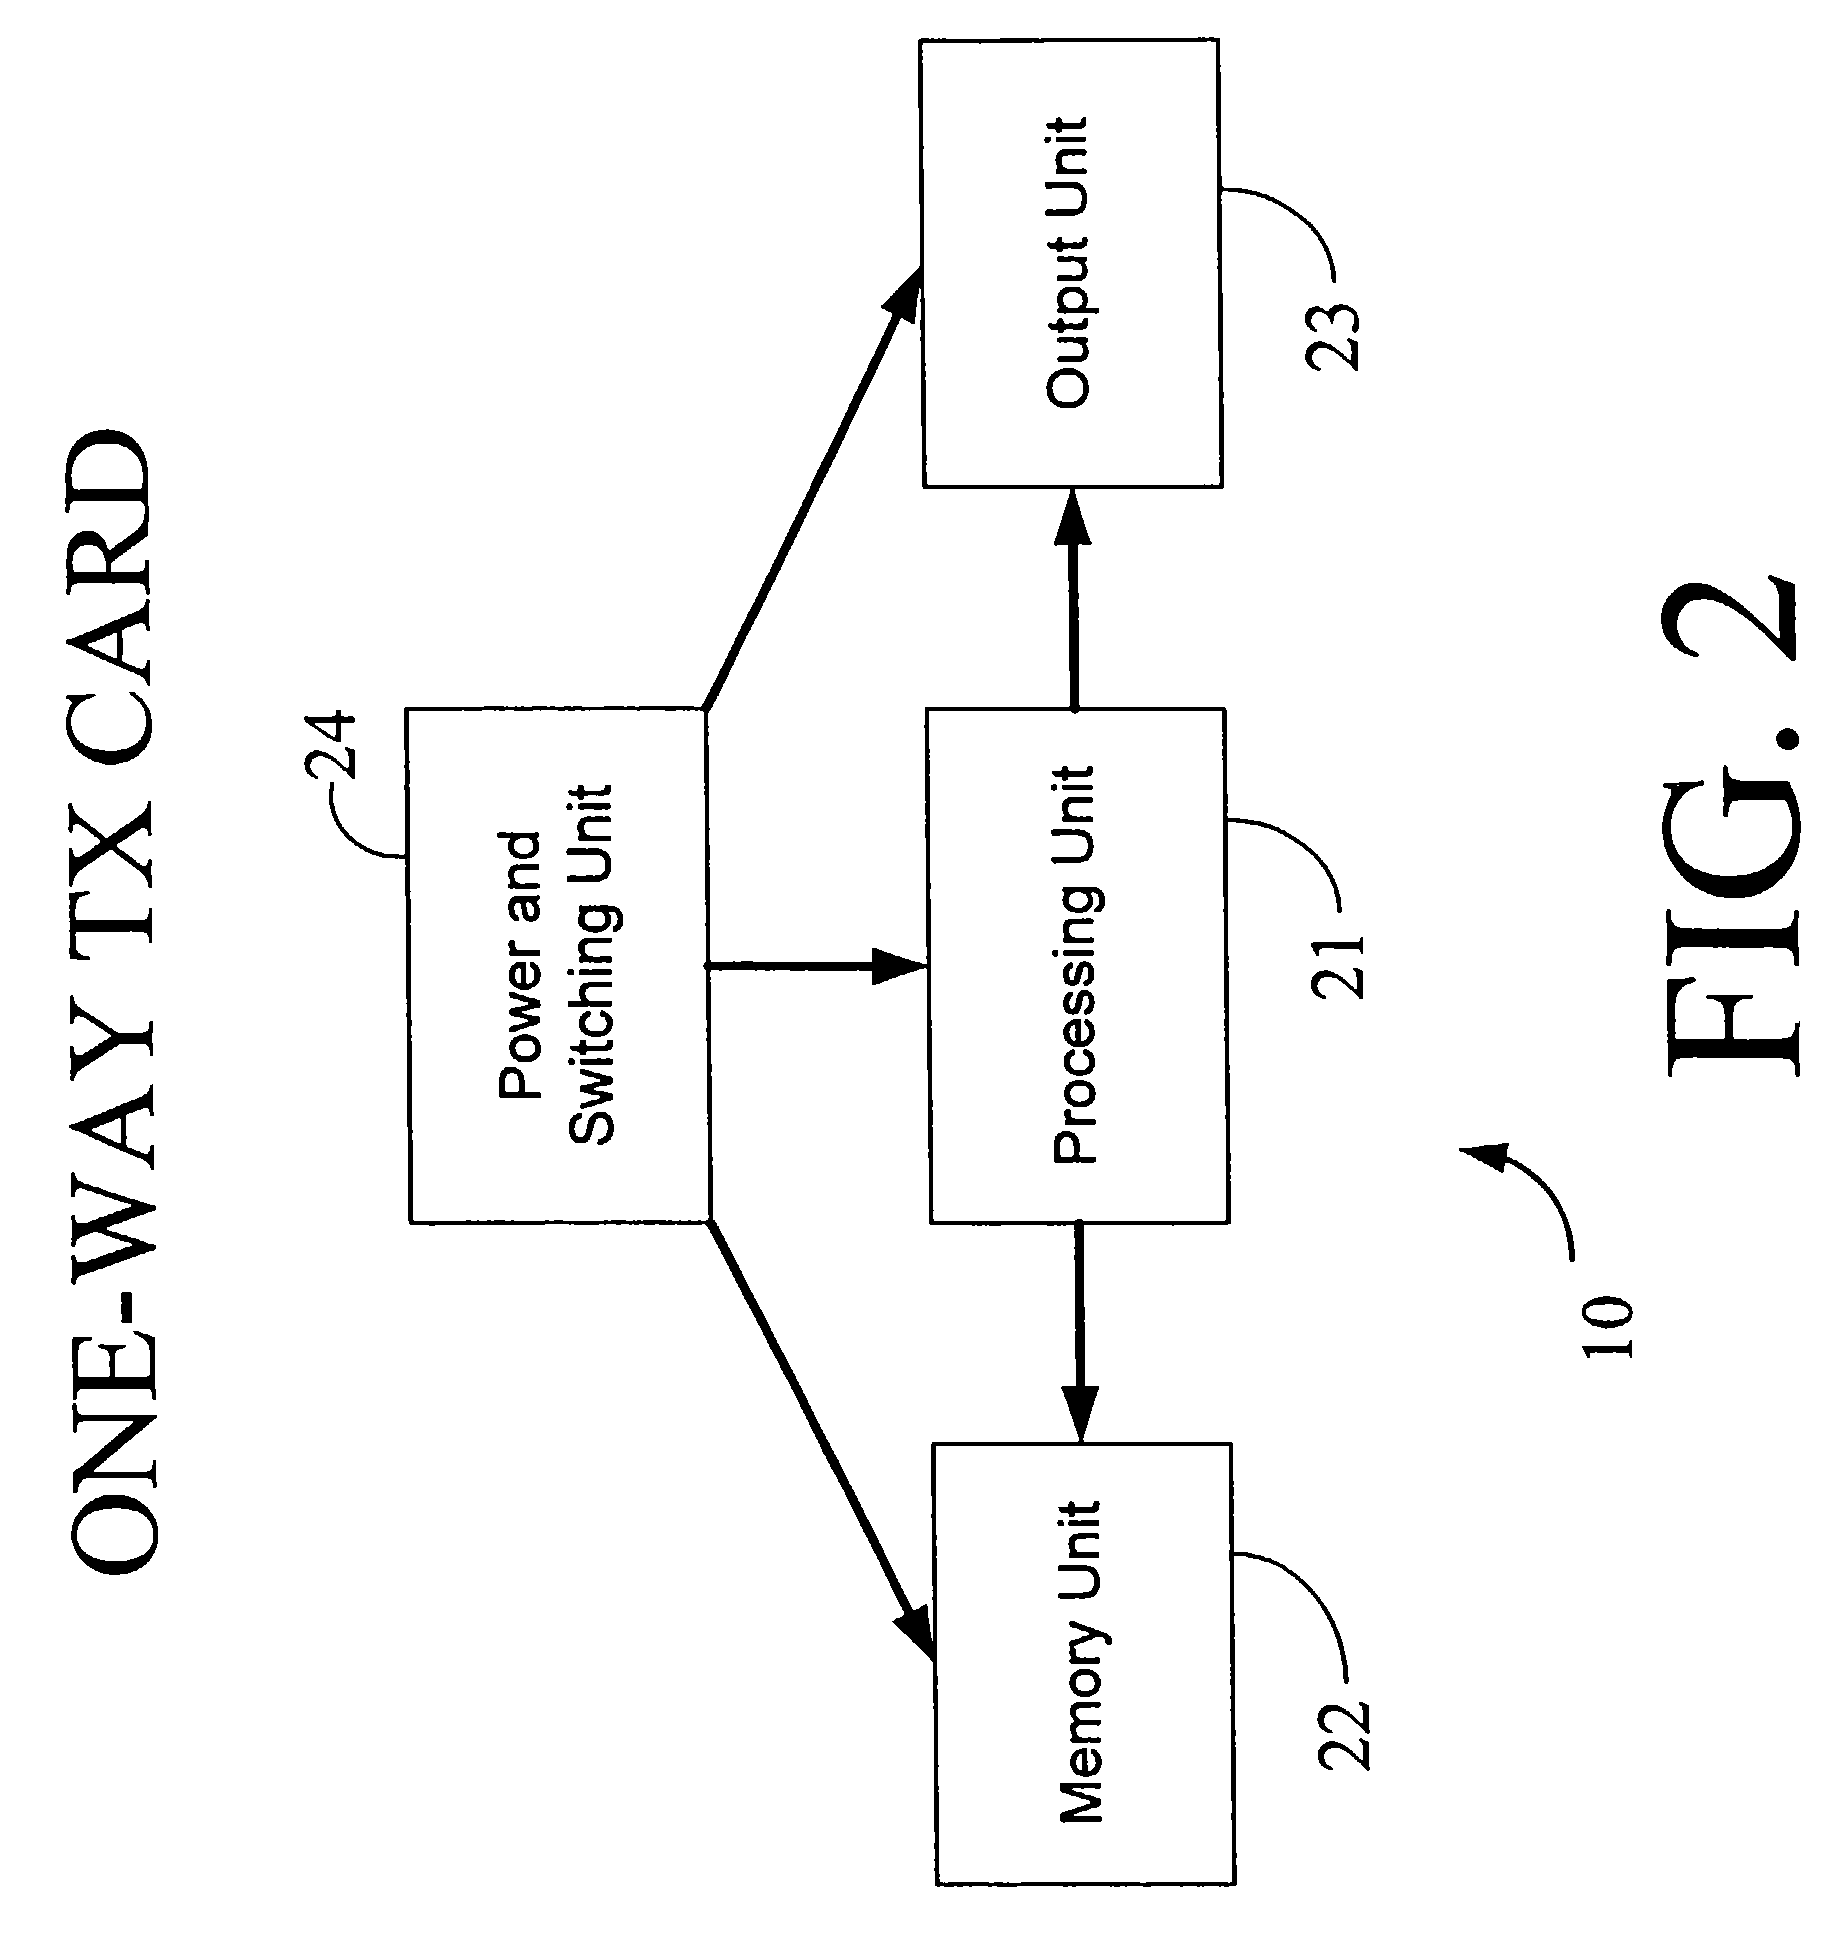 Physical presence digital authentication system